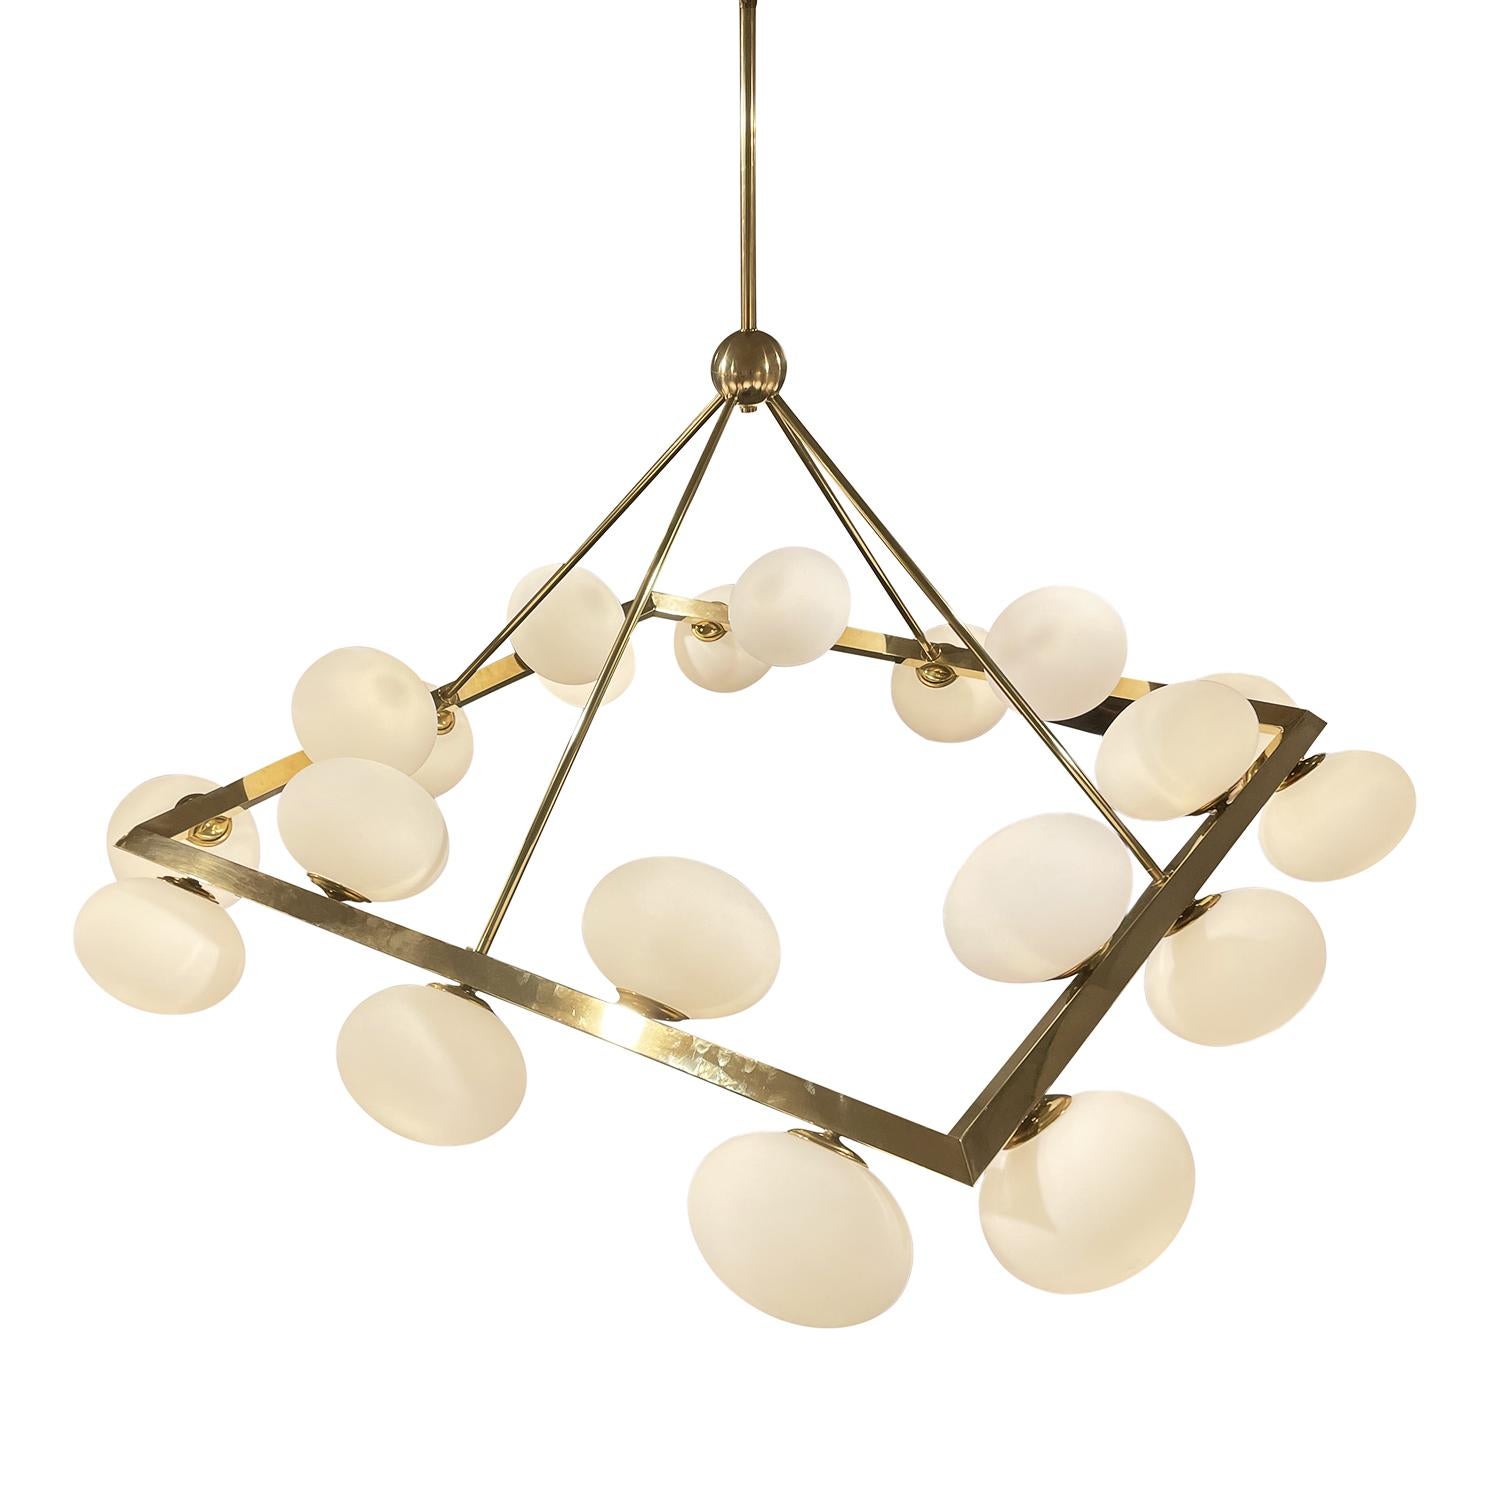 A gold, vintage Mid-Century Modern Italian square chandelier, pendant made of hand blown frosted opaline glass, designed and produced most likely by Stilnovo in good condition. Each glass shade of the detailed ceiling light, lamp is halted by a